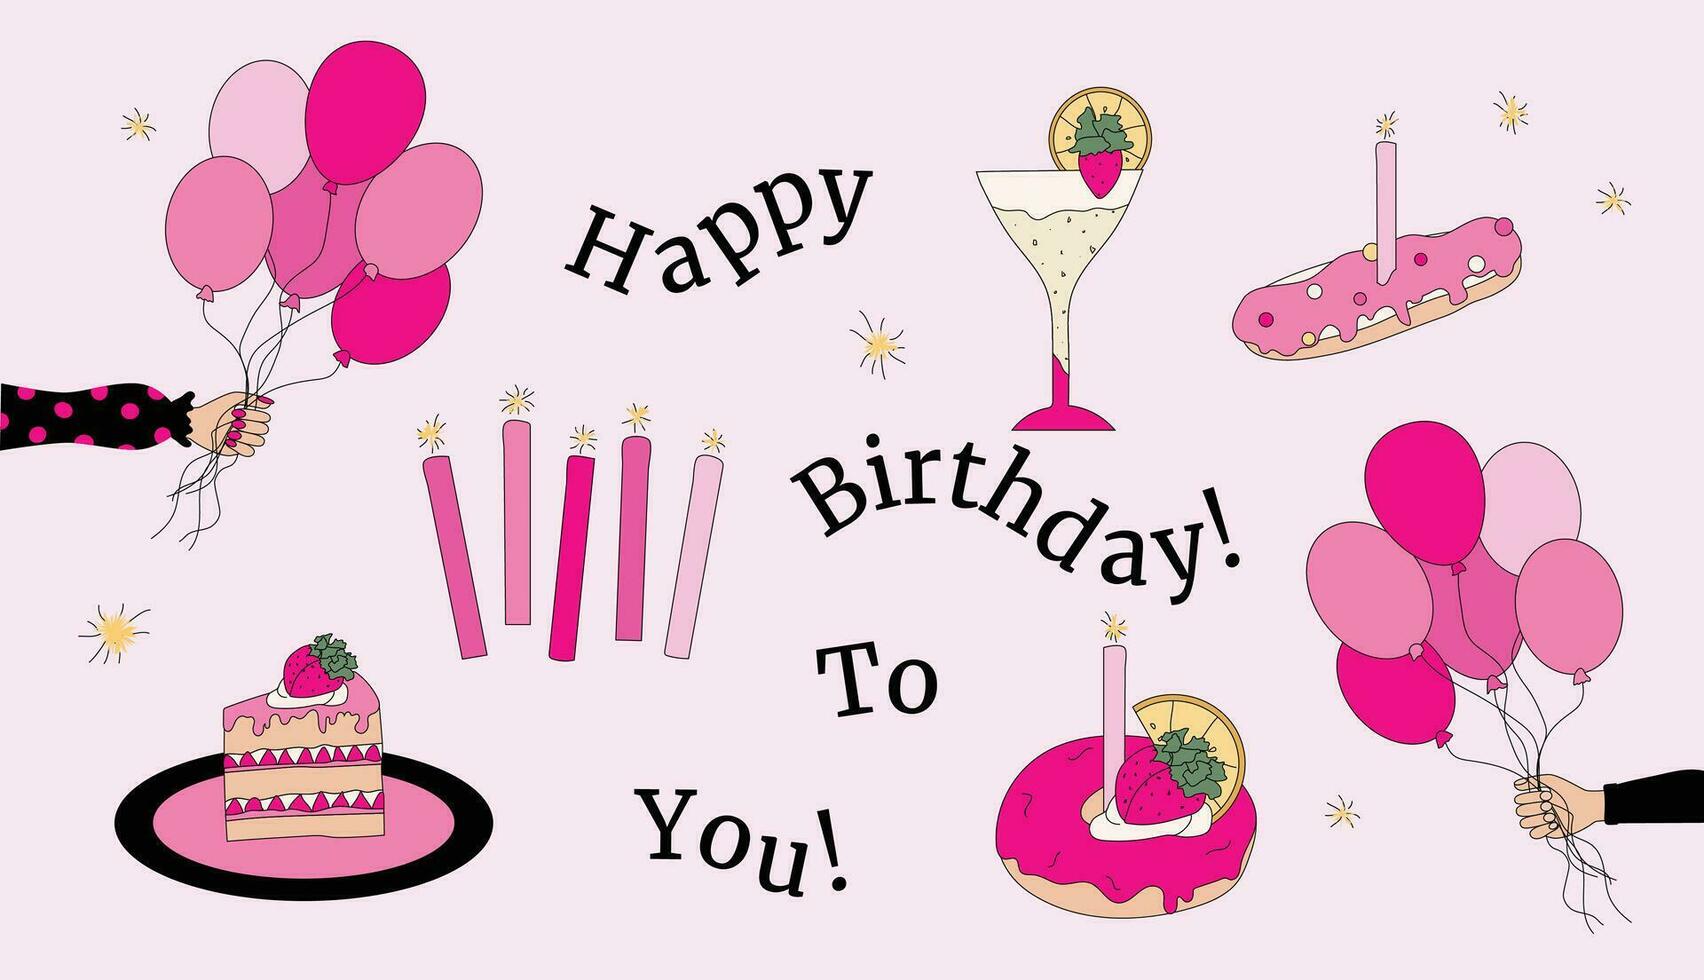 Happy Birthday Hand Drawn Illustrations Set with Lettering Balloons, Candles,Sweets, Premium Vector